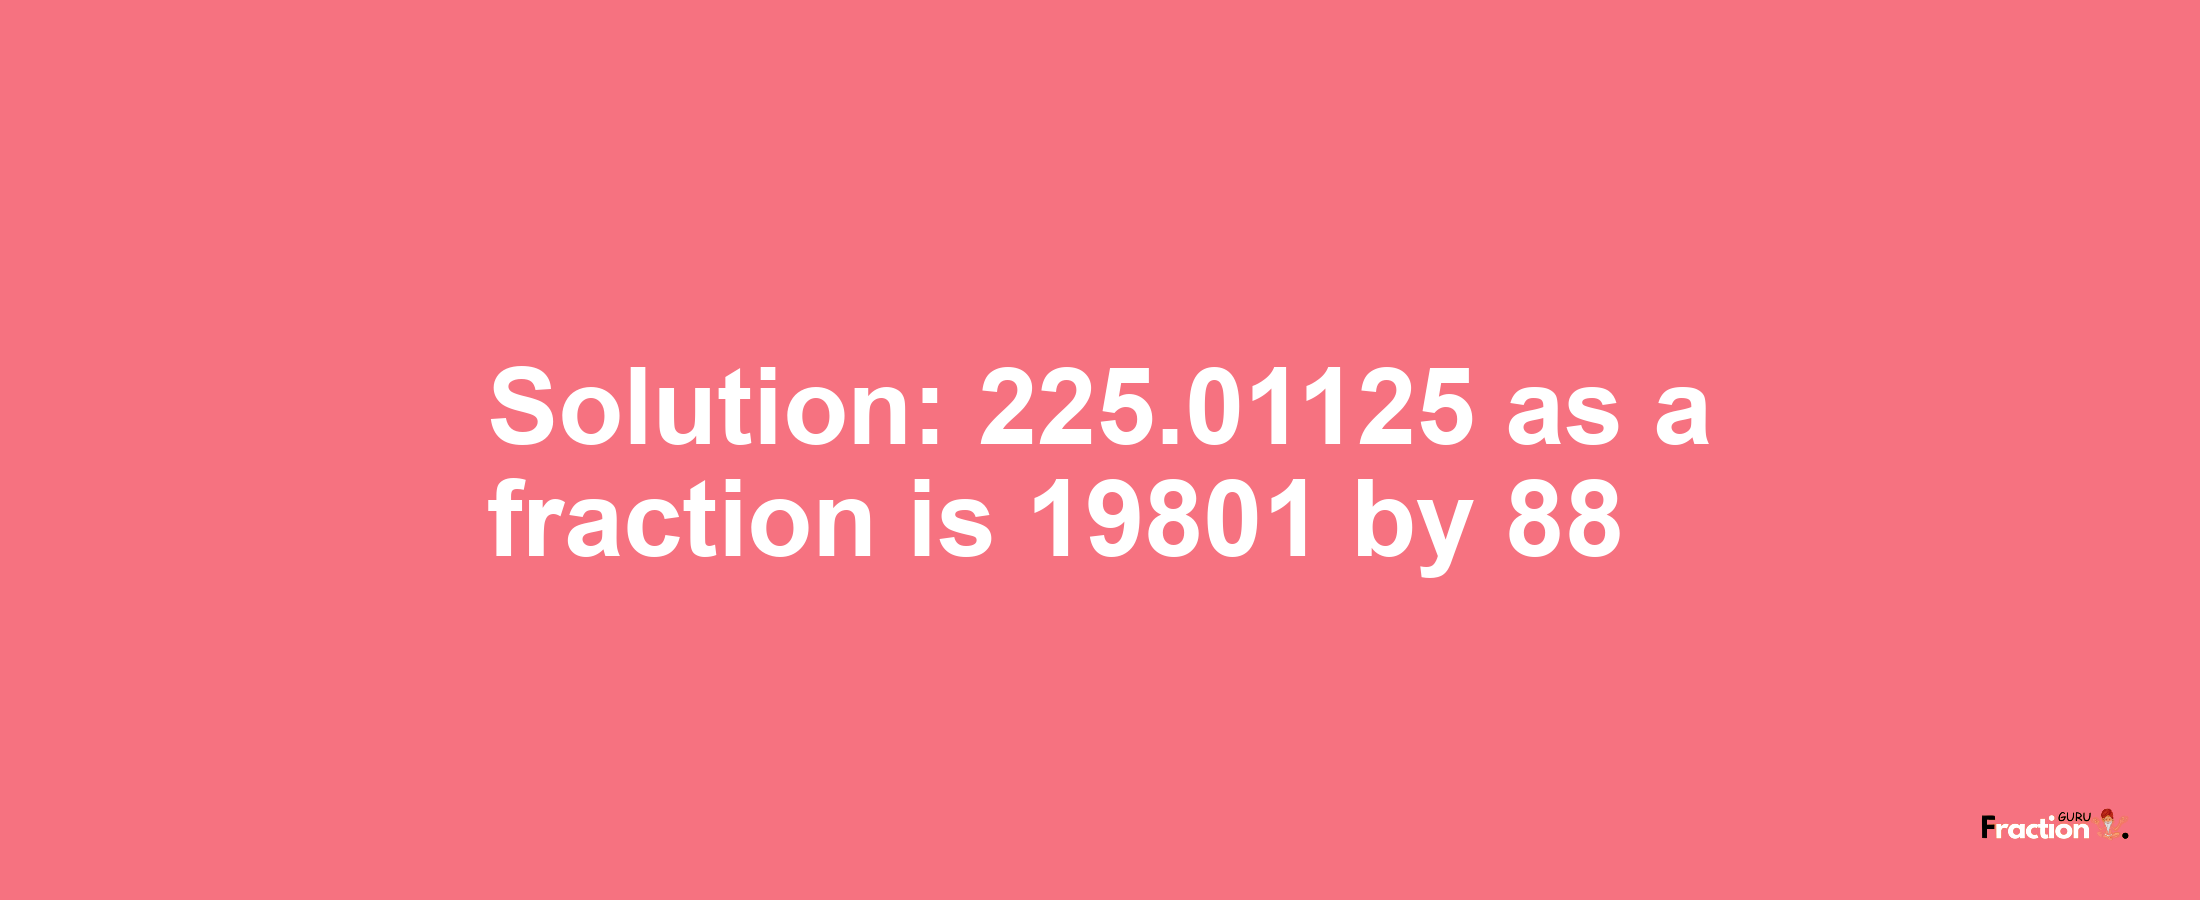 Solution:225.01125 as a fraction is 19801/88